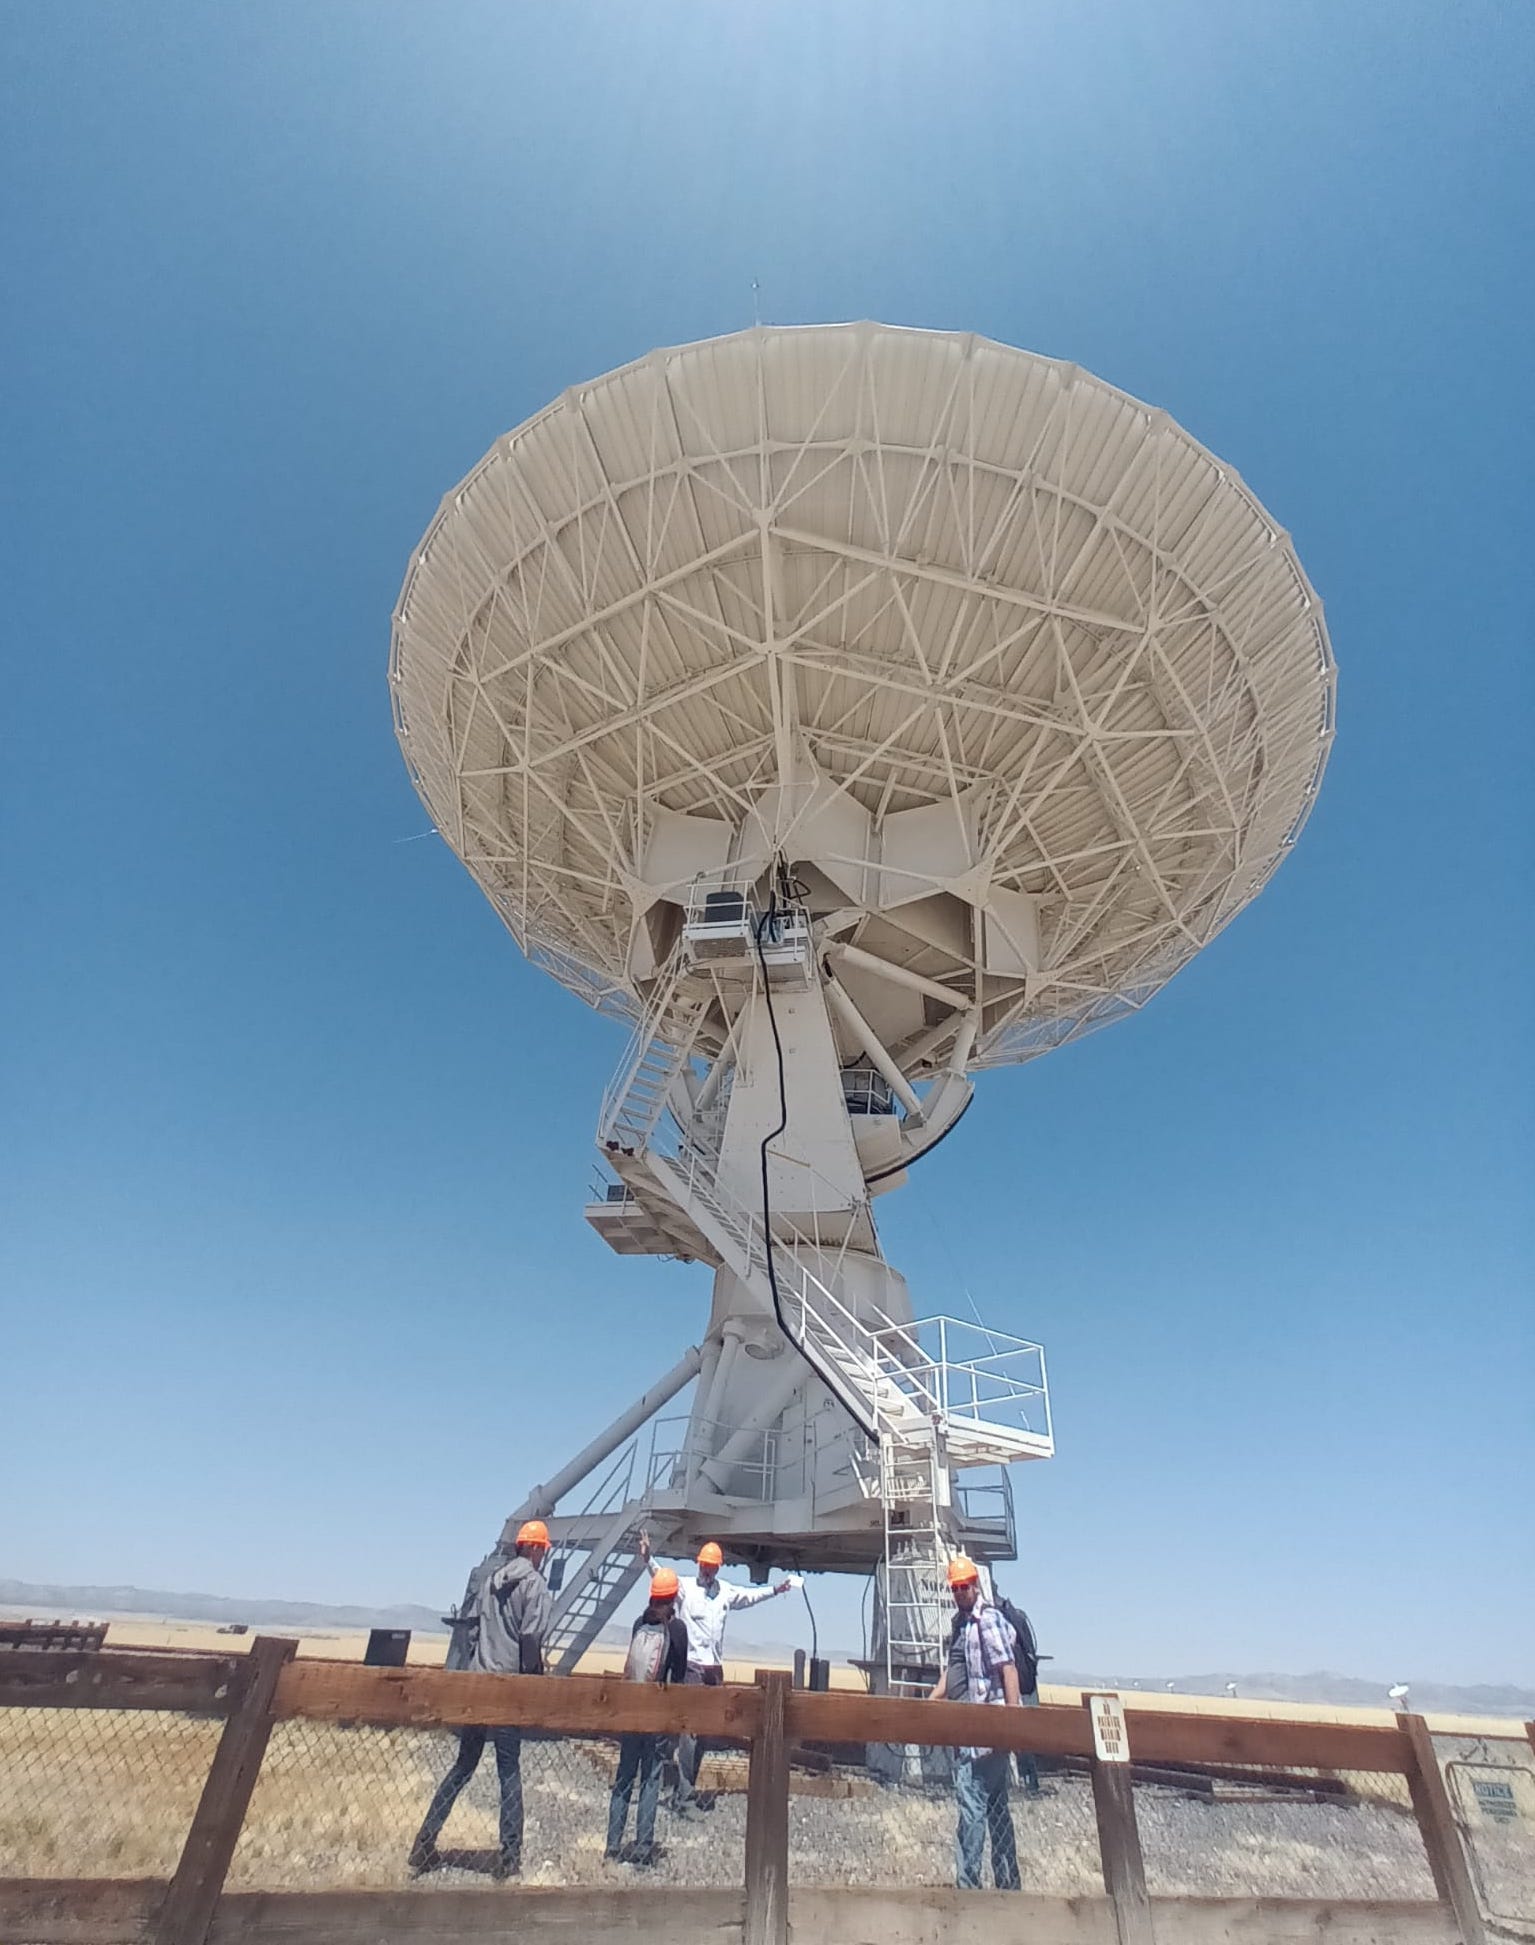 One of the antennas at the VLA, ready for us to climb on and take in the landscape